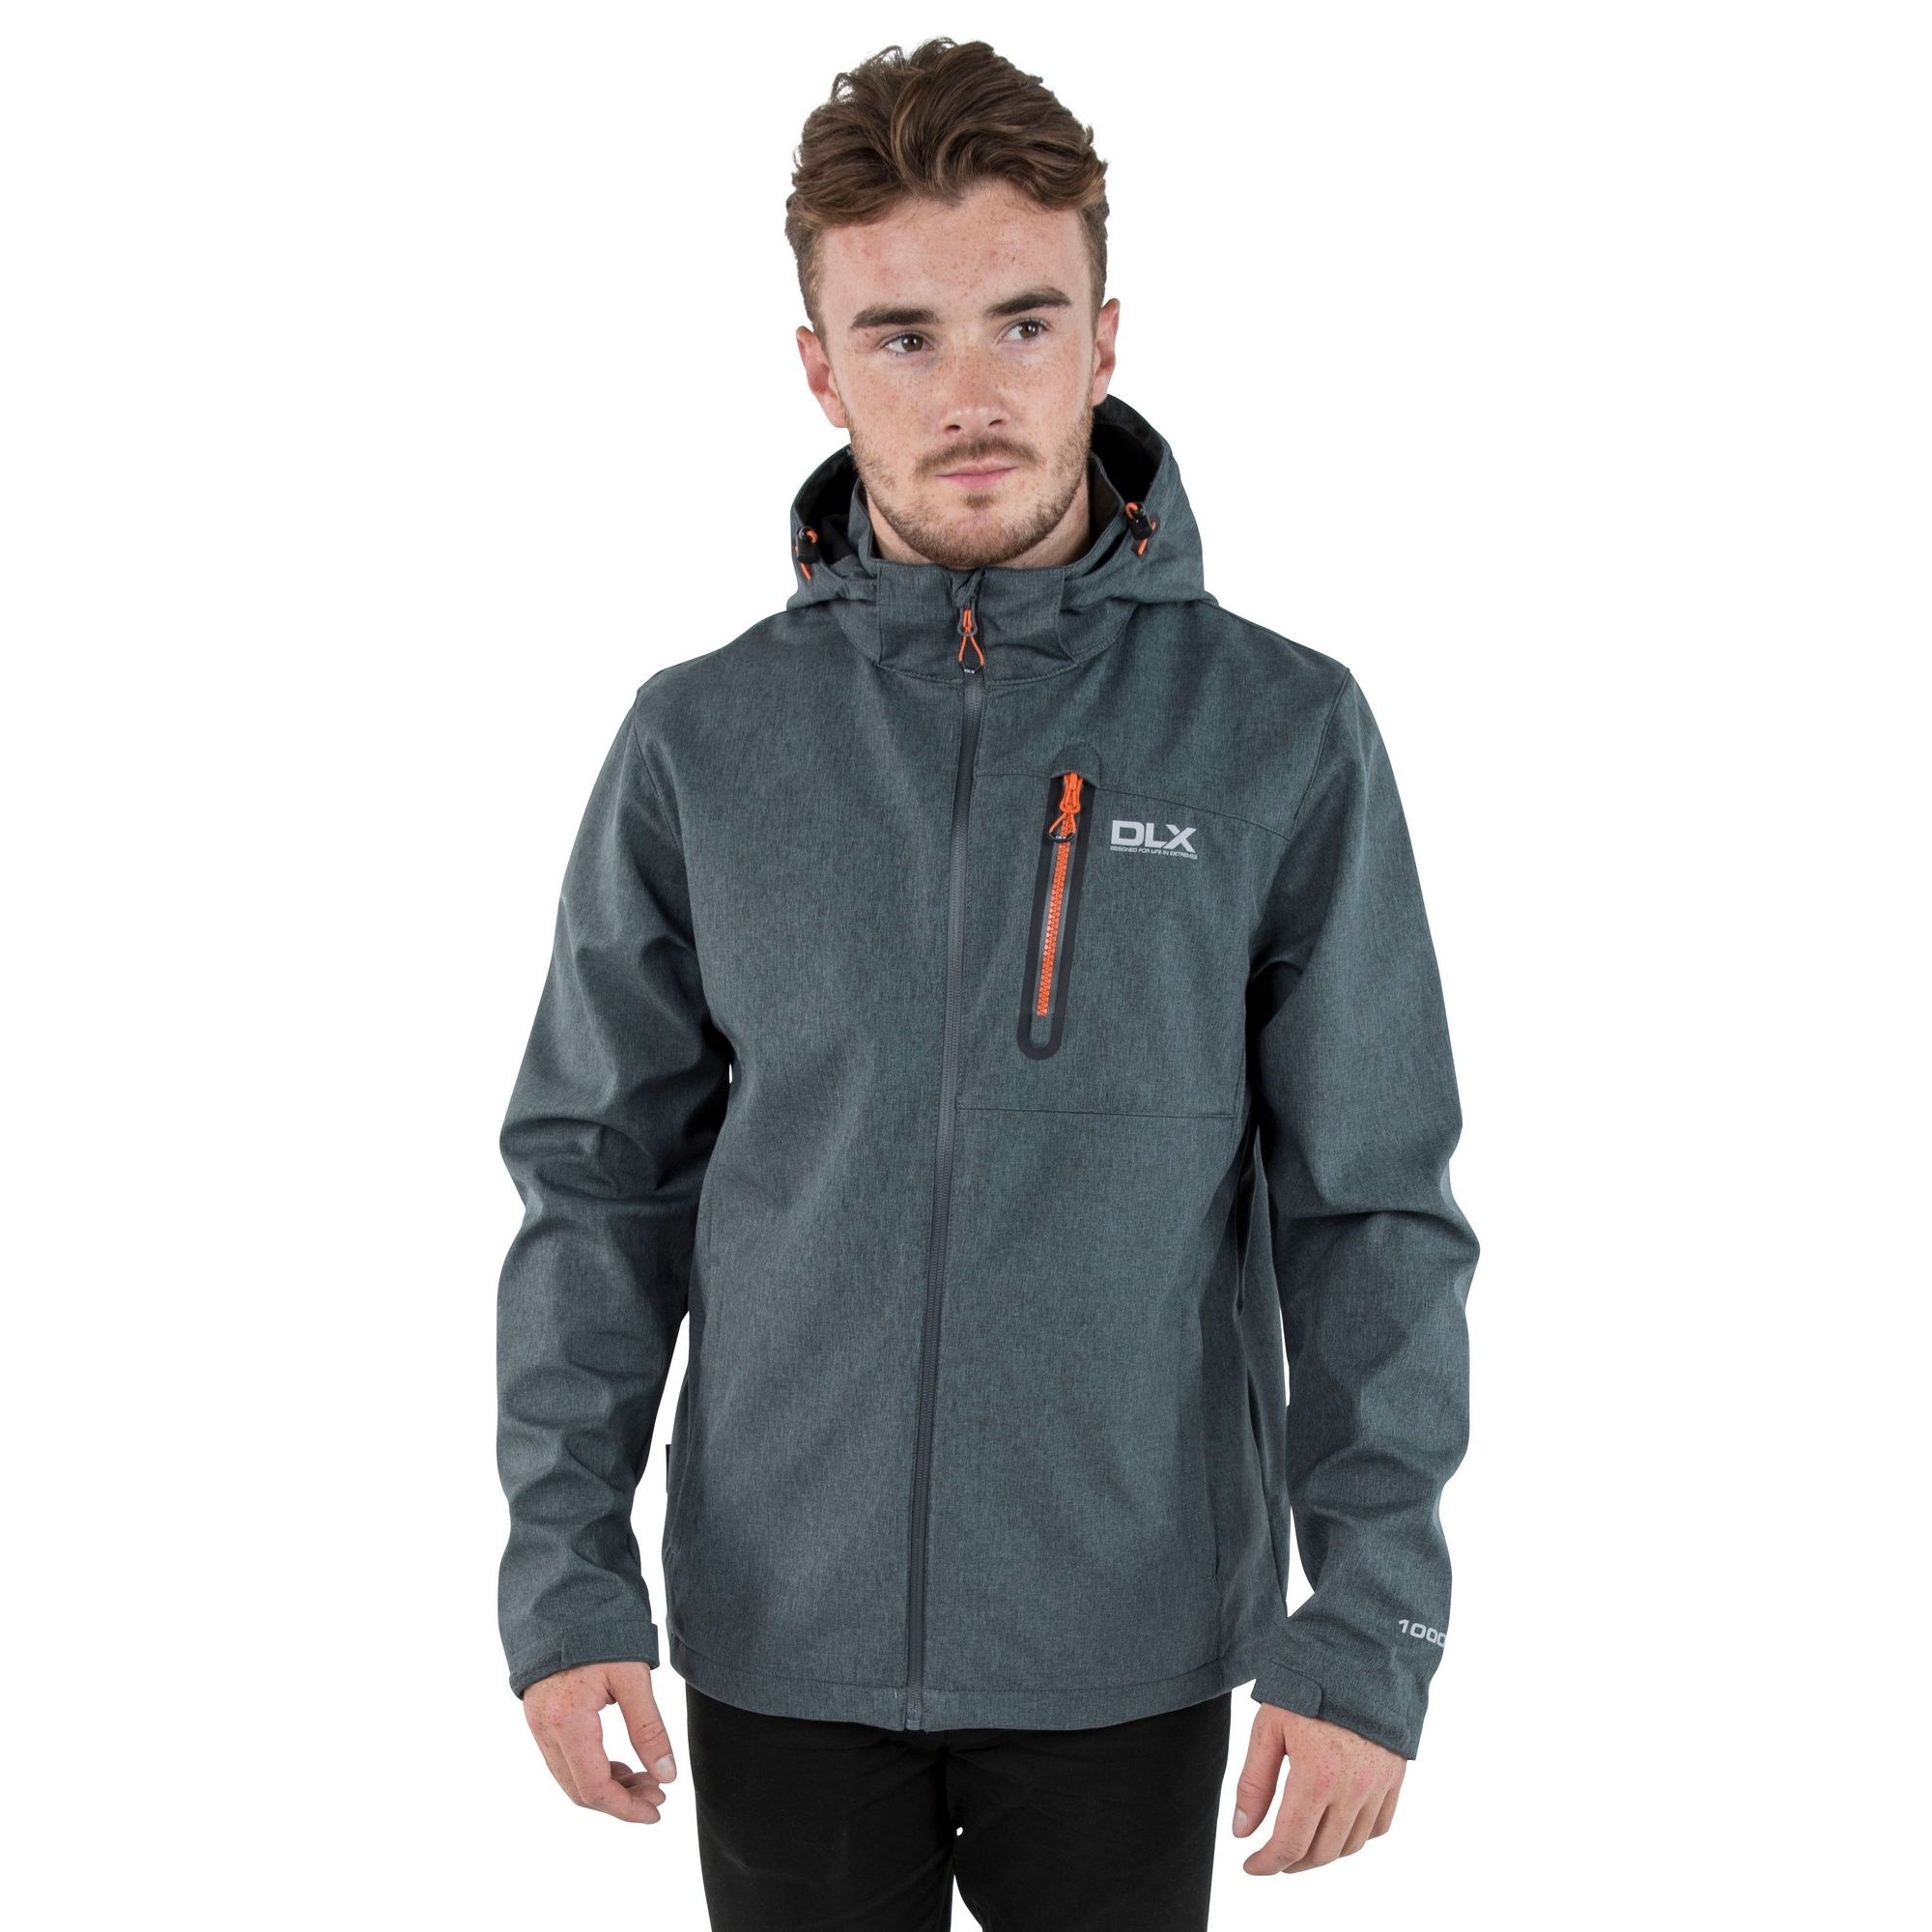 Adjustable zip off hood. Water repellent front zip. Water repellent chest pocket with contrast teeth detail. 2 lower zipped pockets. Drawcord adjustment at hem. Cuff tab with hook and loop adjustment. Waterproof 10000mm, breathable 5000mvp. 100% Polyester, TPU membrane. Trespass Mens Chest Sizing (approx): S - 35-37in/89-94cm, M - 38-40in/96.5-101.5cm, L - 41-43in/104-109cm, XL - 44-46in/111.5-117cm, XXL - 46-48in/117-122cm, 3XL - 48-50in/122-127cm.